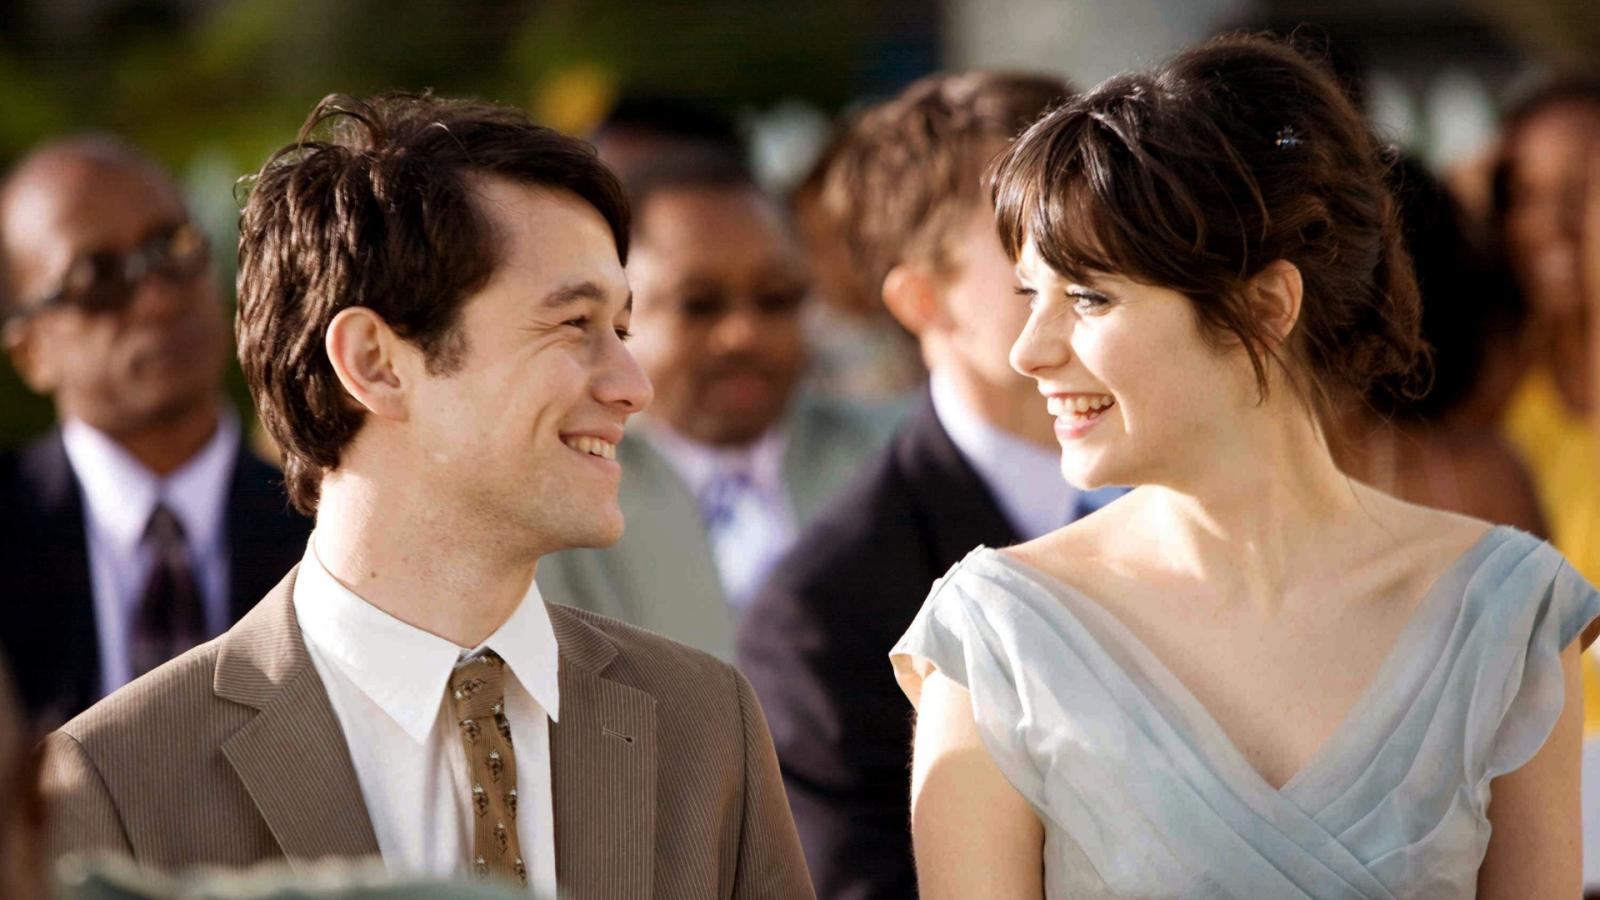 15 Rom-Coms Every Person Must Watch In Their 20s - image 6